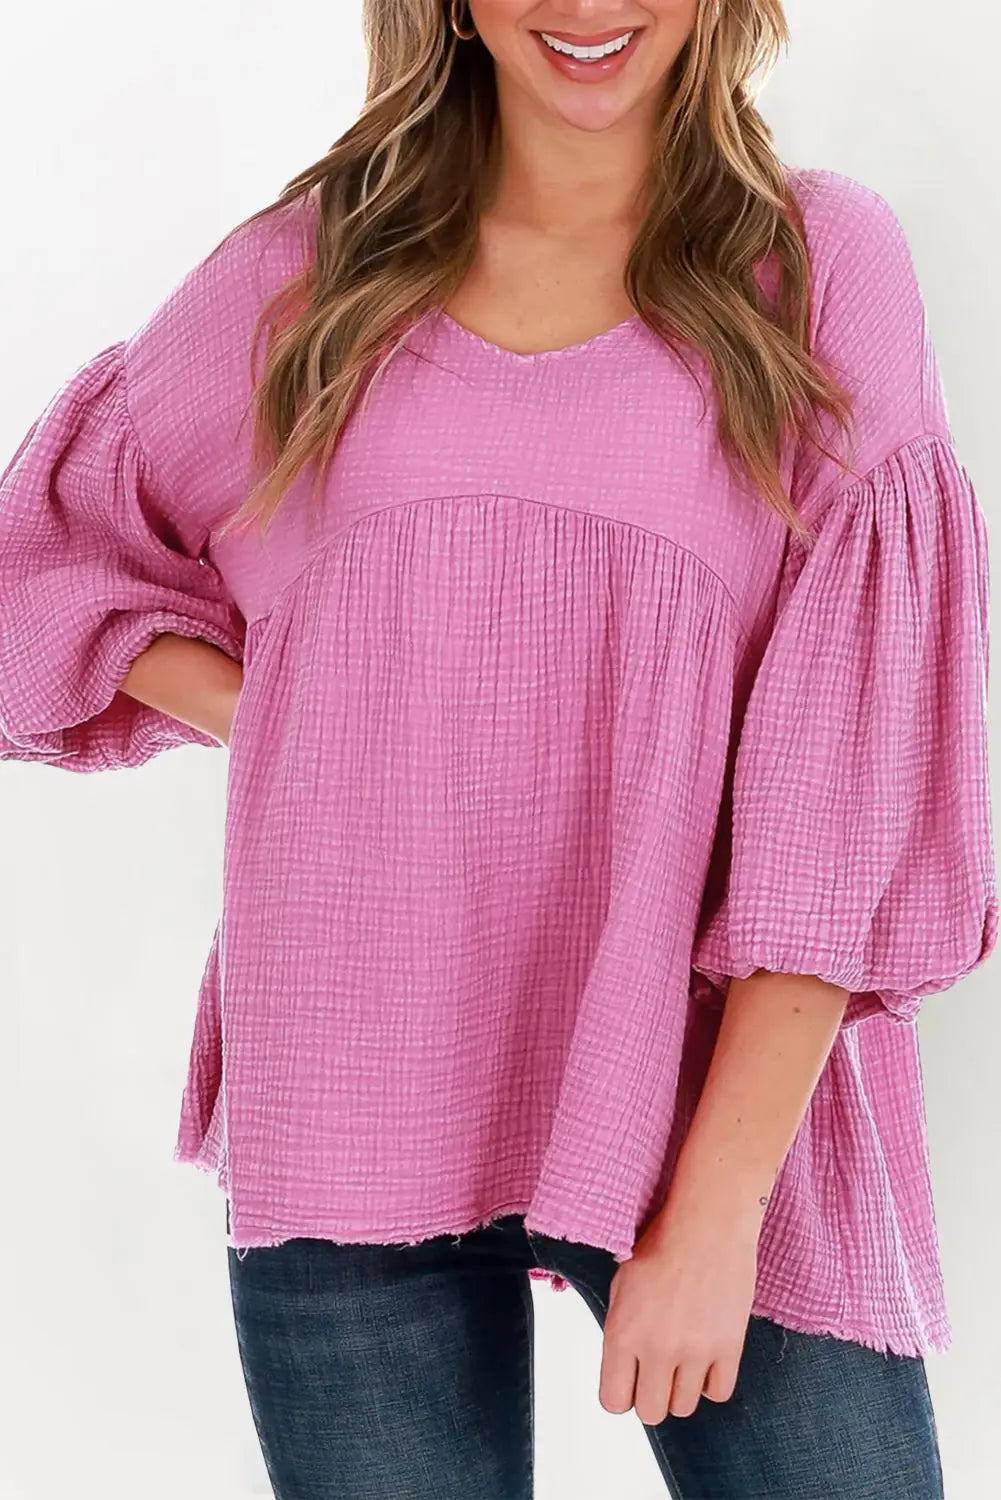 Pink crinkle bubble sleeve raw hem babydoll blouse - s / 100% cotton - tops